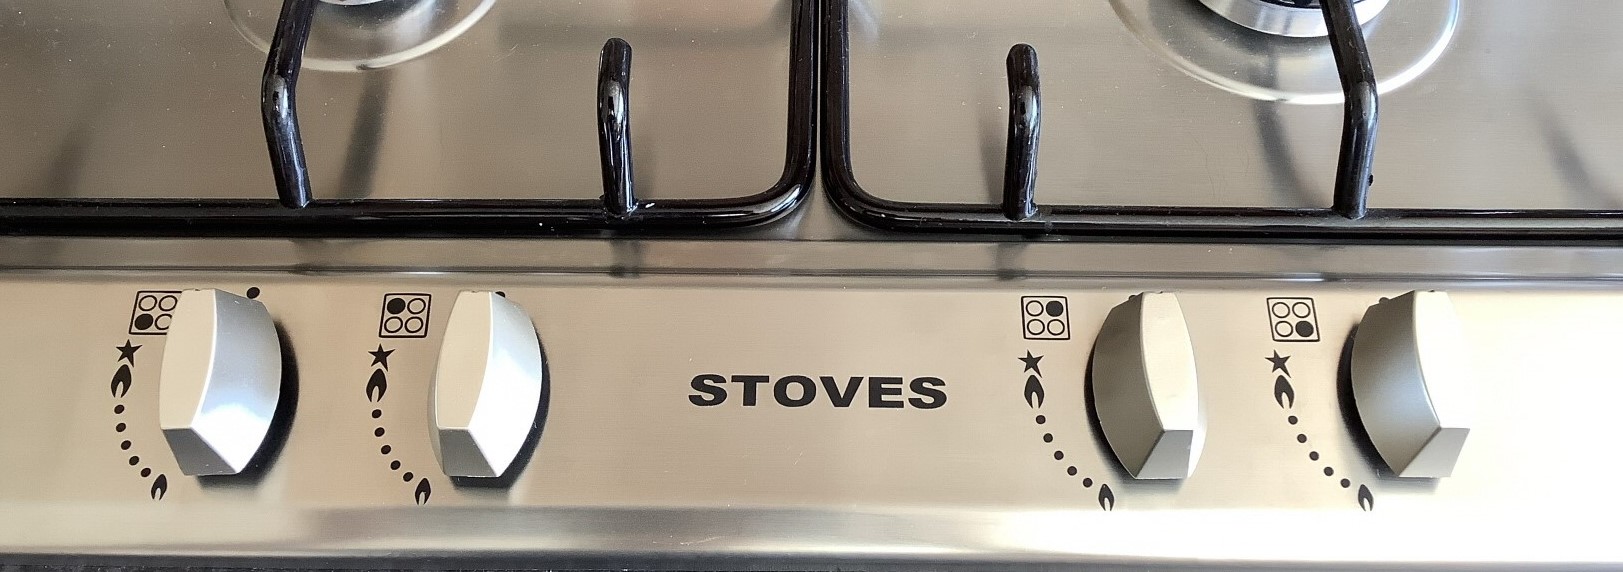 stoves gas hob images